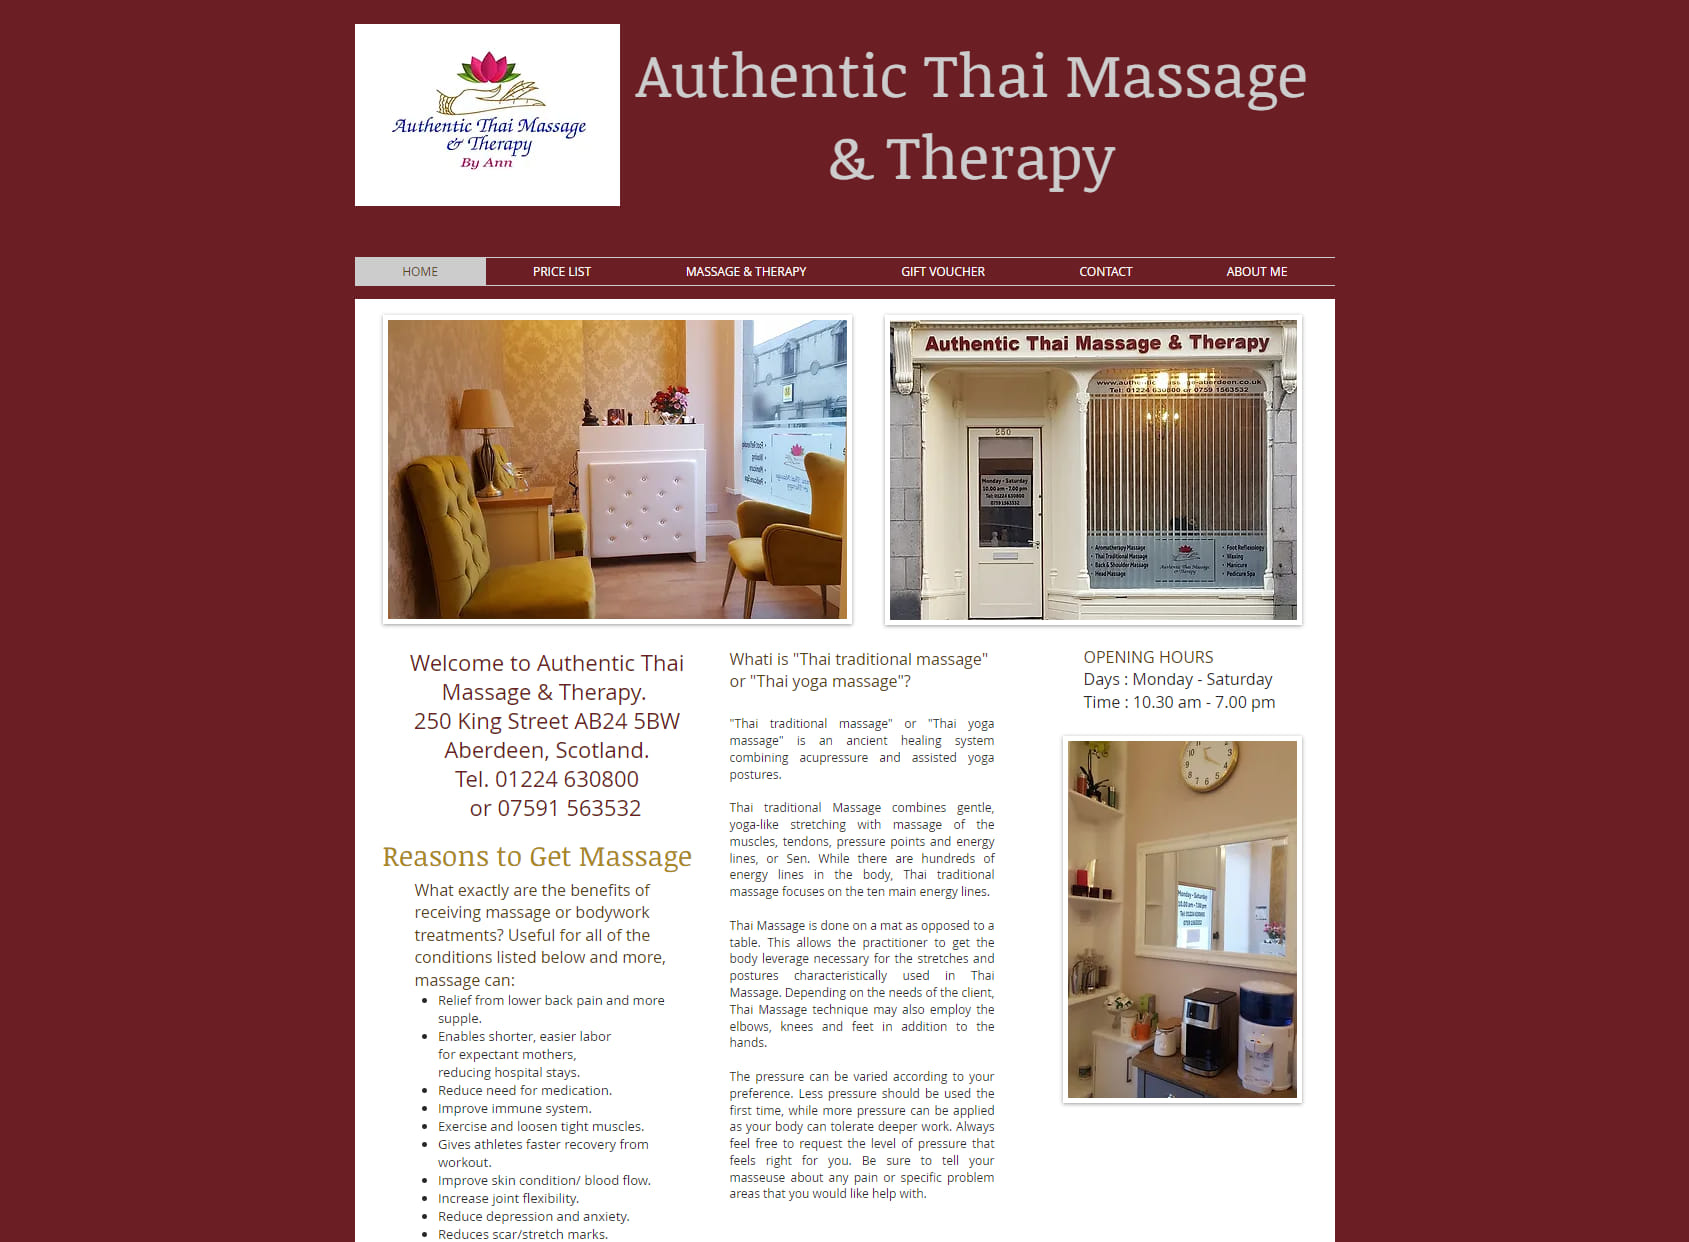 Authentic Thai Massage & Therapy